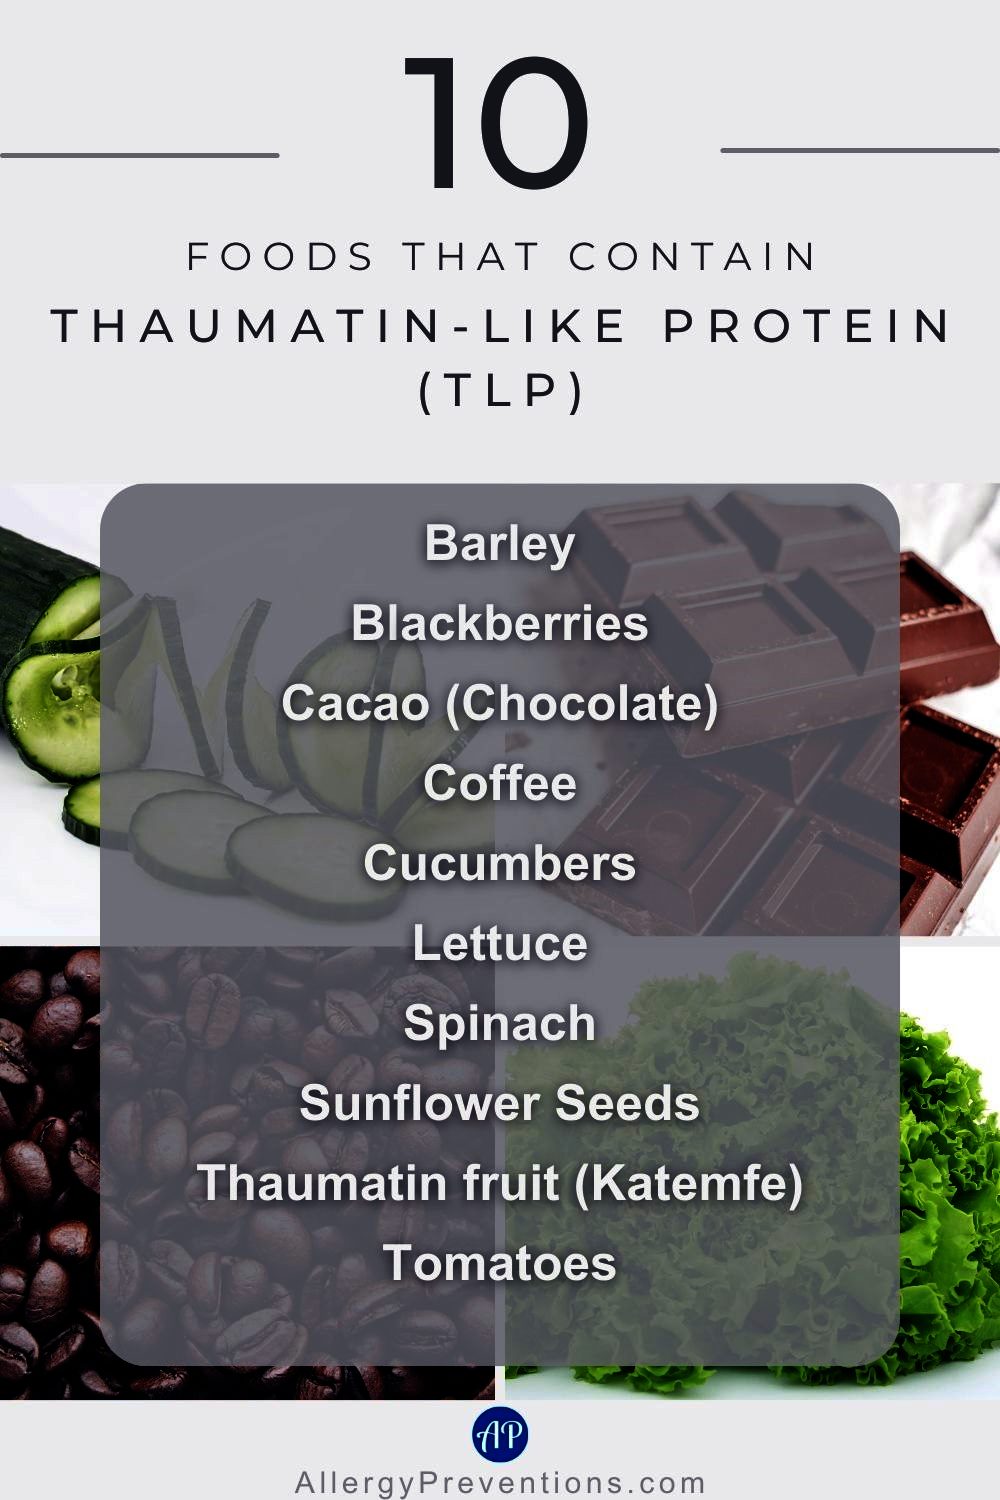 Foods that contain Thaumatin-Like Protein (TLP) infographic. Barley, Blackberries, Cacao (Chocolate), Coffee, Cucumbers, Lettuce, Spinach, Sunflower Seeds, Thaumatin fruit (Katemfe), and Tomatoes.